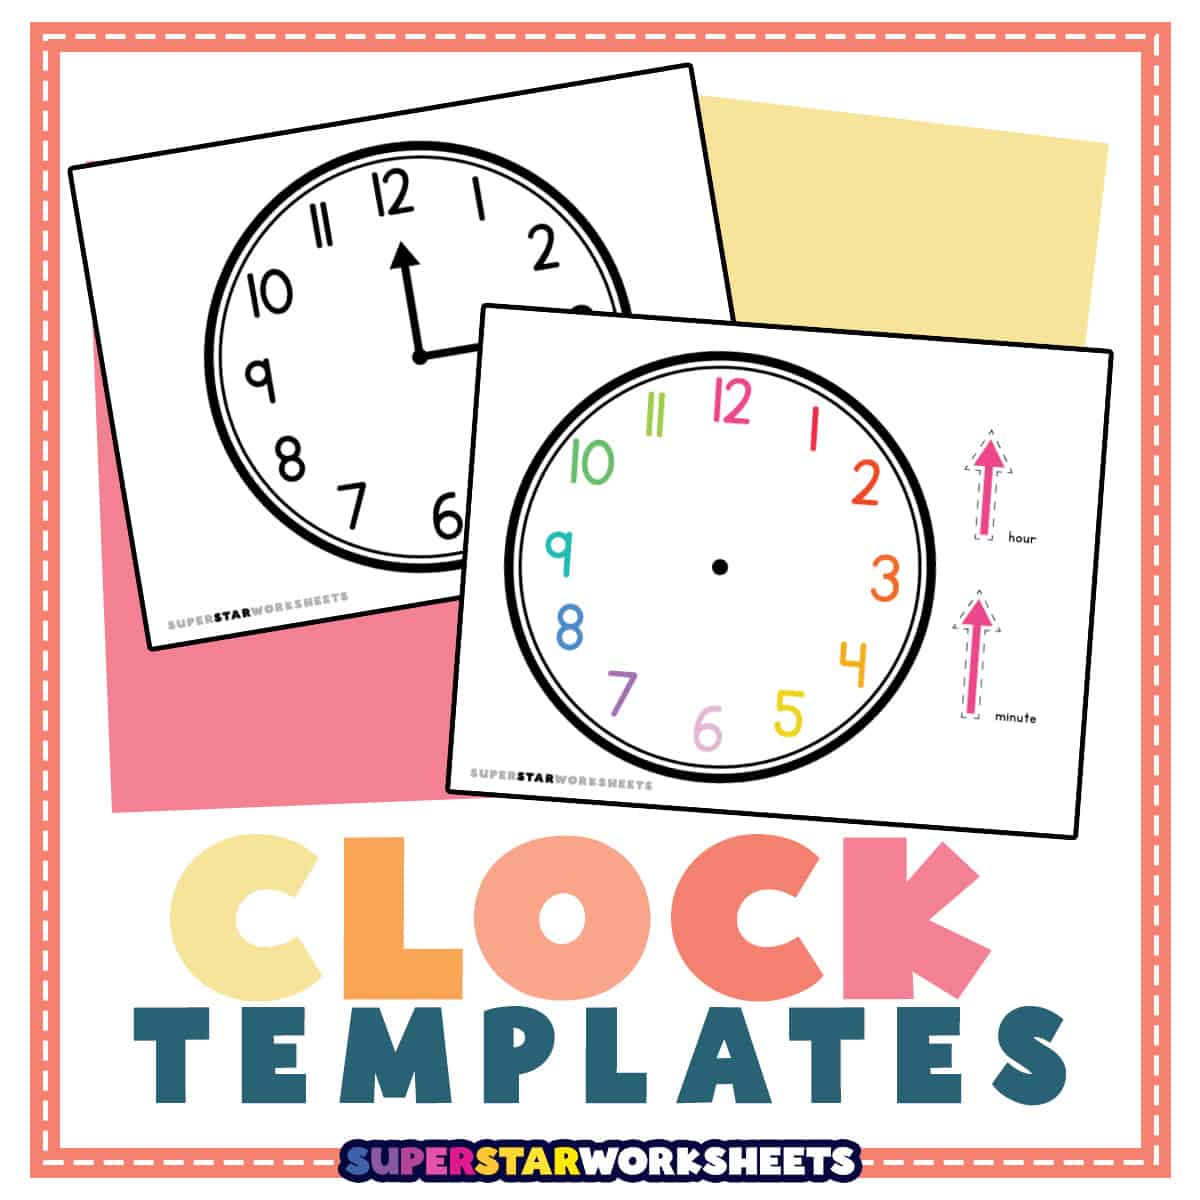 Free Printable Clock Face for Kids